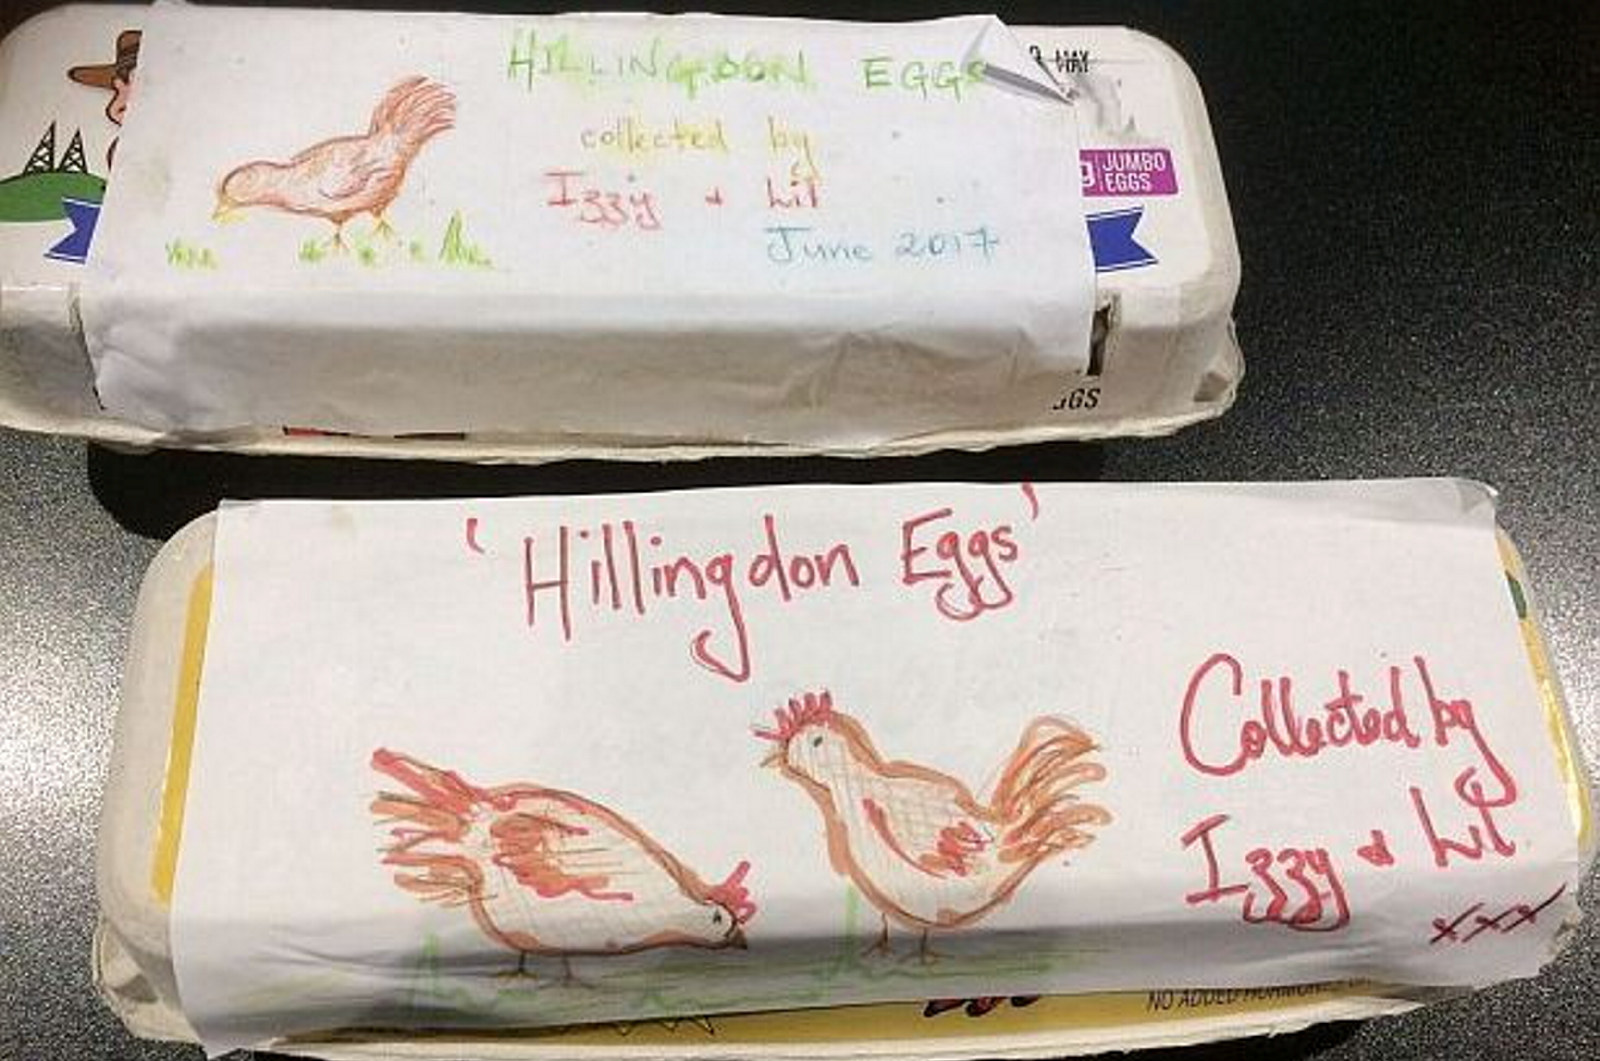 Box of eggs with handwritten label.